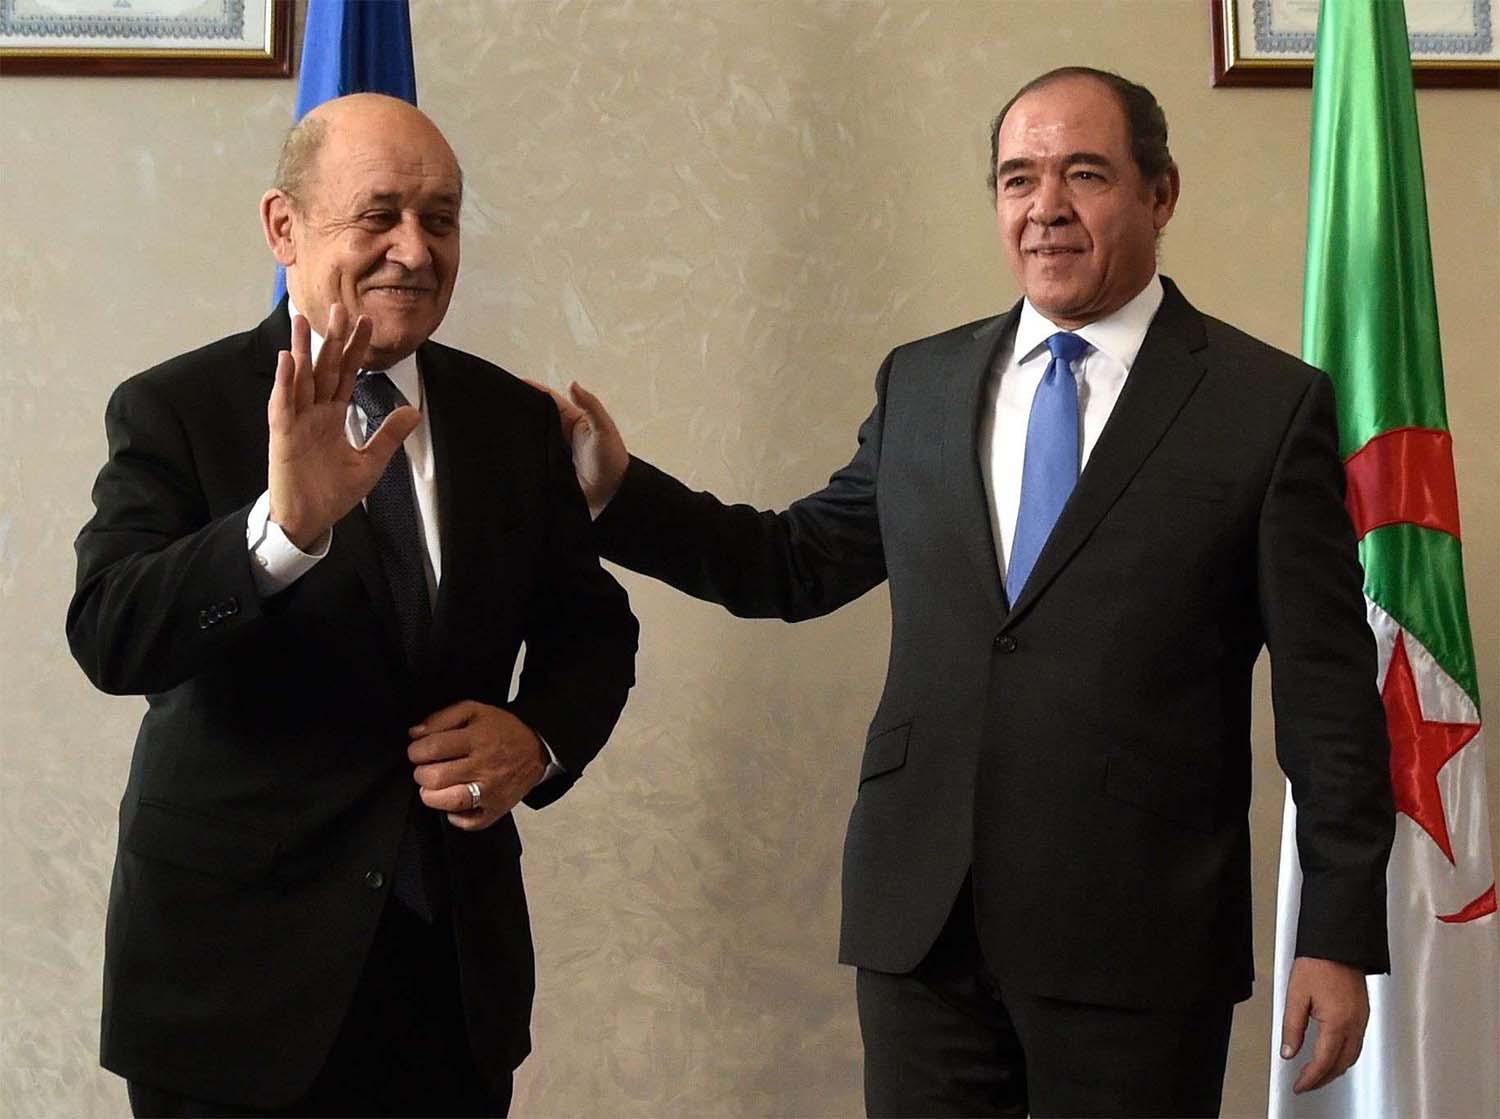 French Foreign Minister Jean-Yves Le Drian (L) and Algerian Foreign Minister Sabri Boukadoum